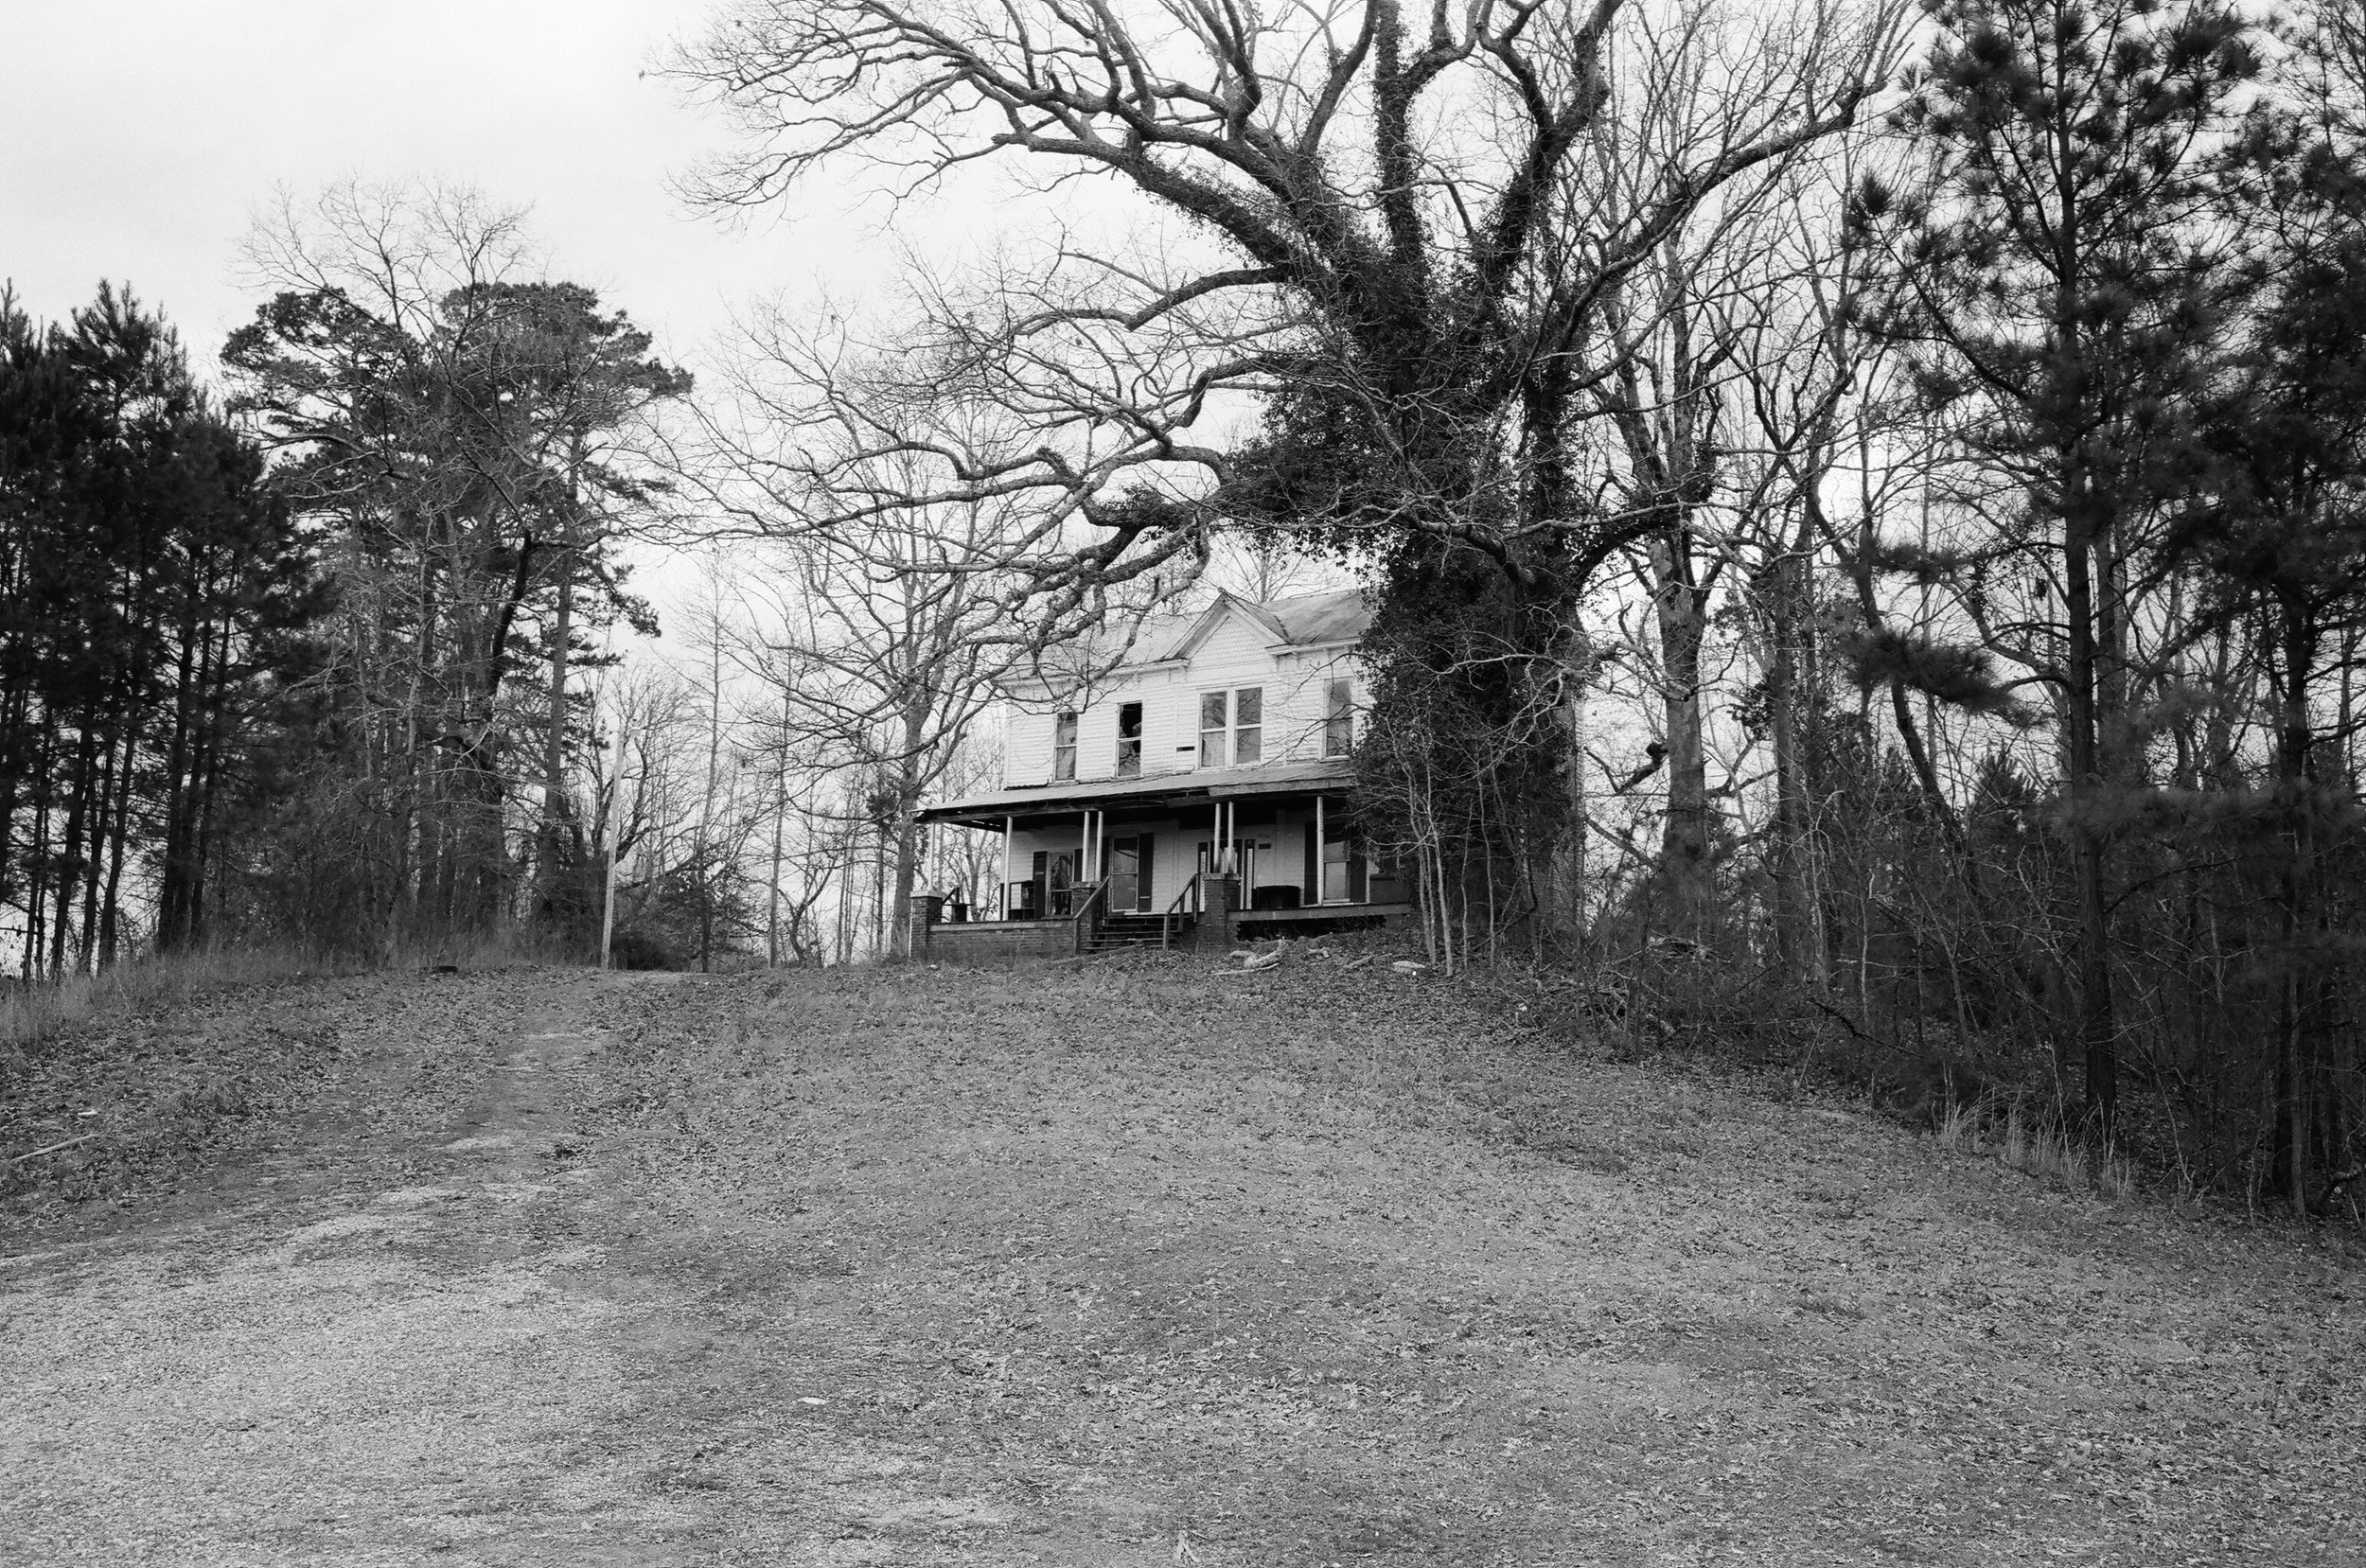  House on a hill at the intersection of Hwy 370 and 9 in Union County - captured on Fujifilm Acros 100 with a Contax G2 Rangefinder with a Contax 28mm Carl Zeiss lens 